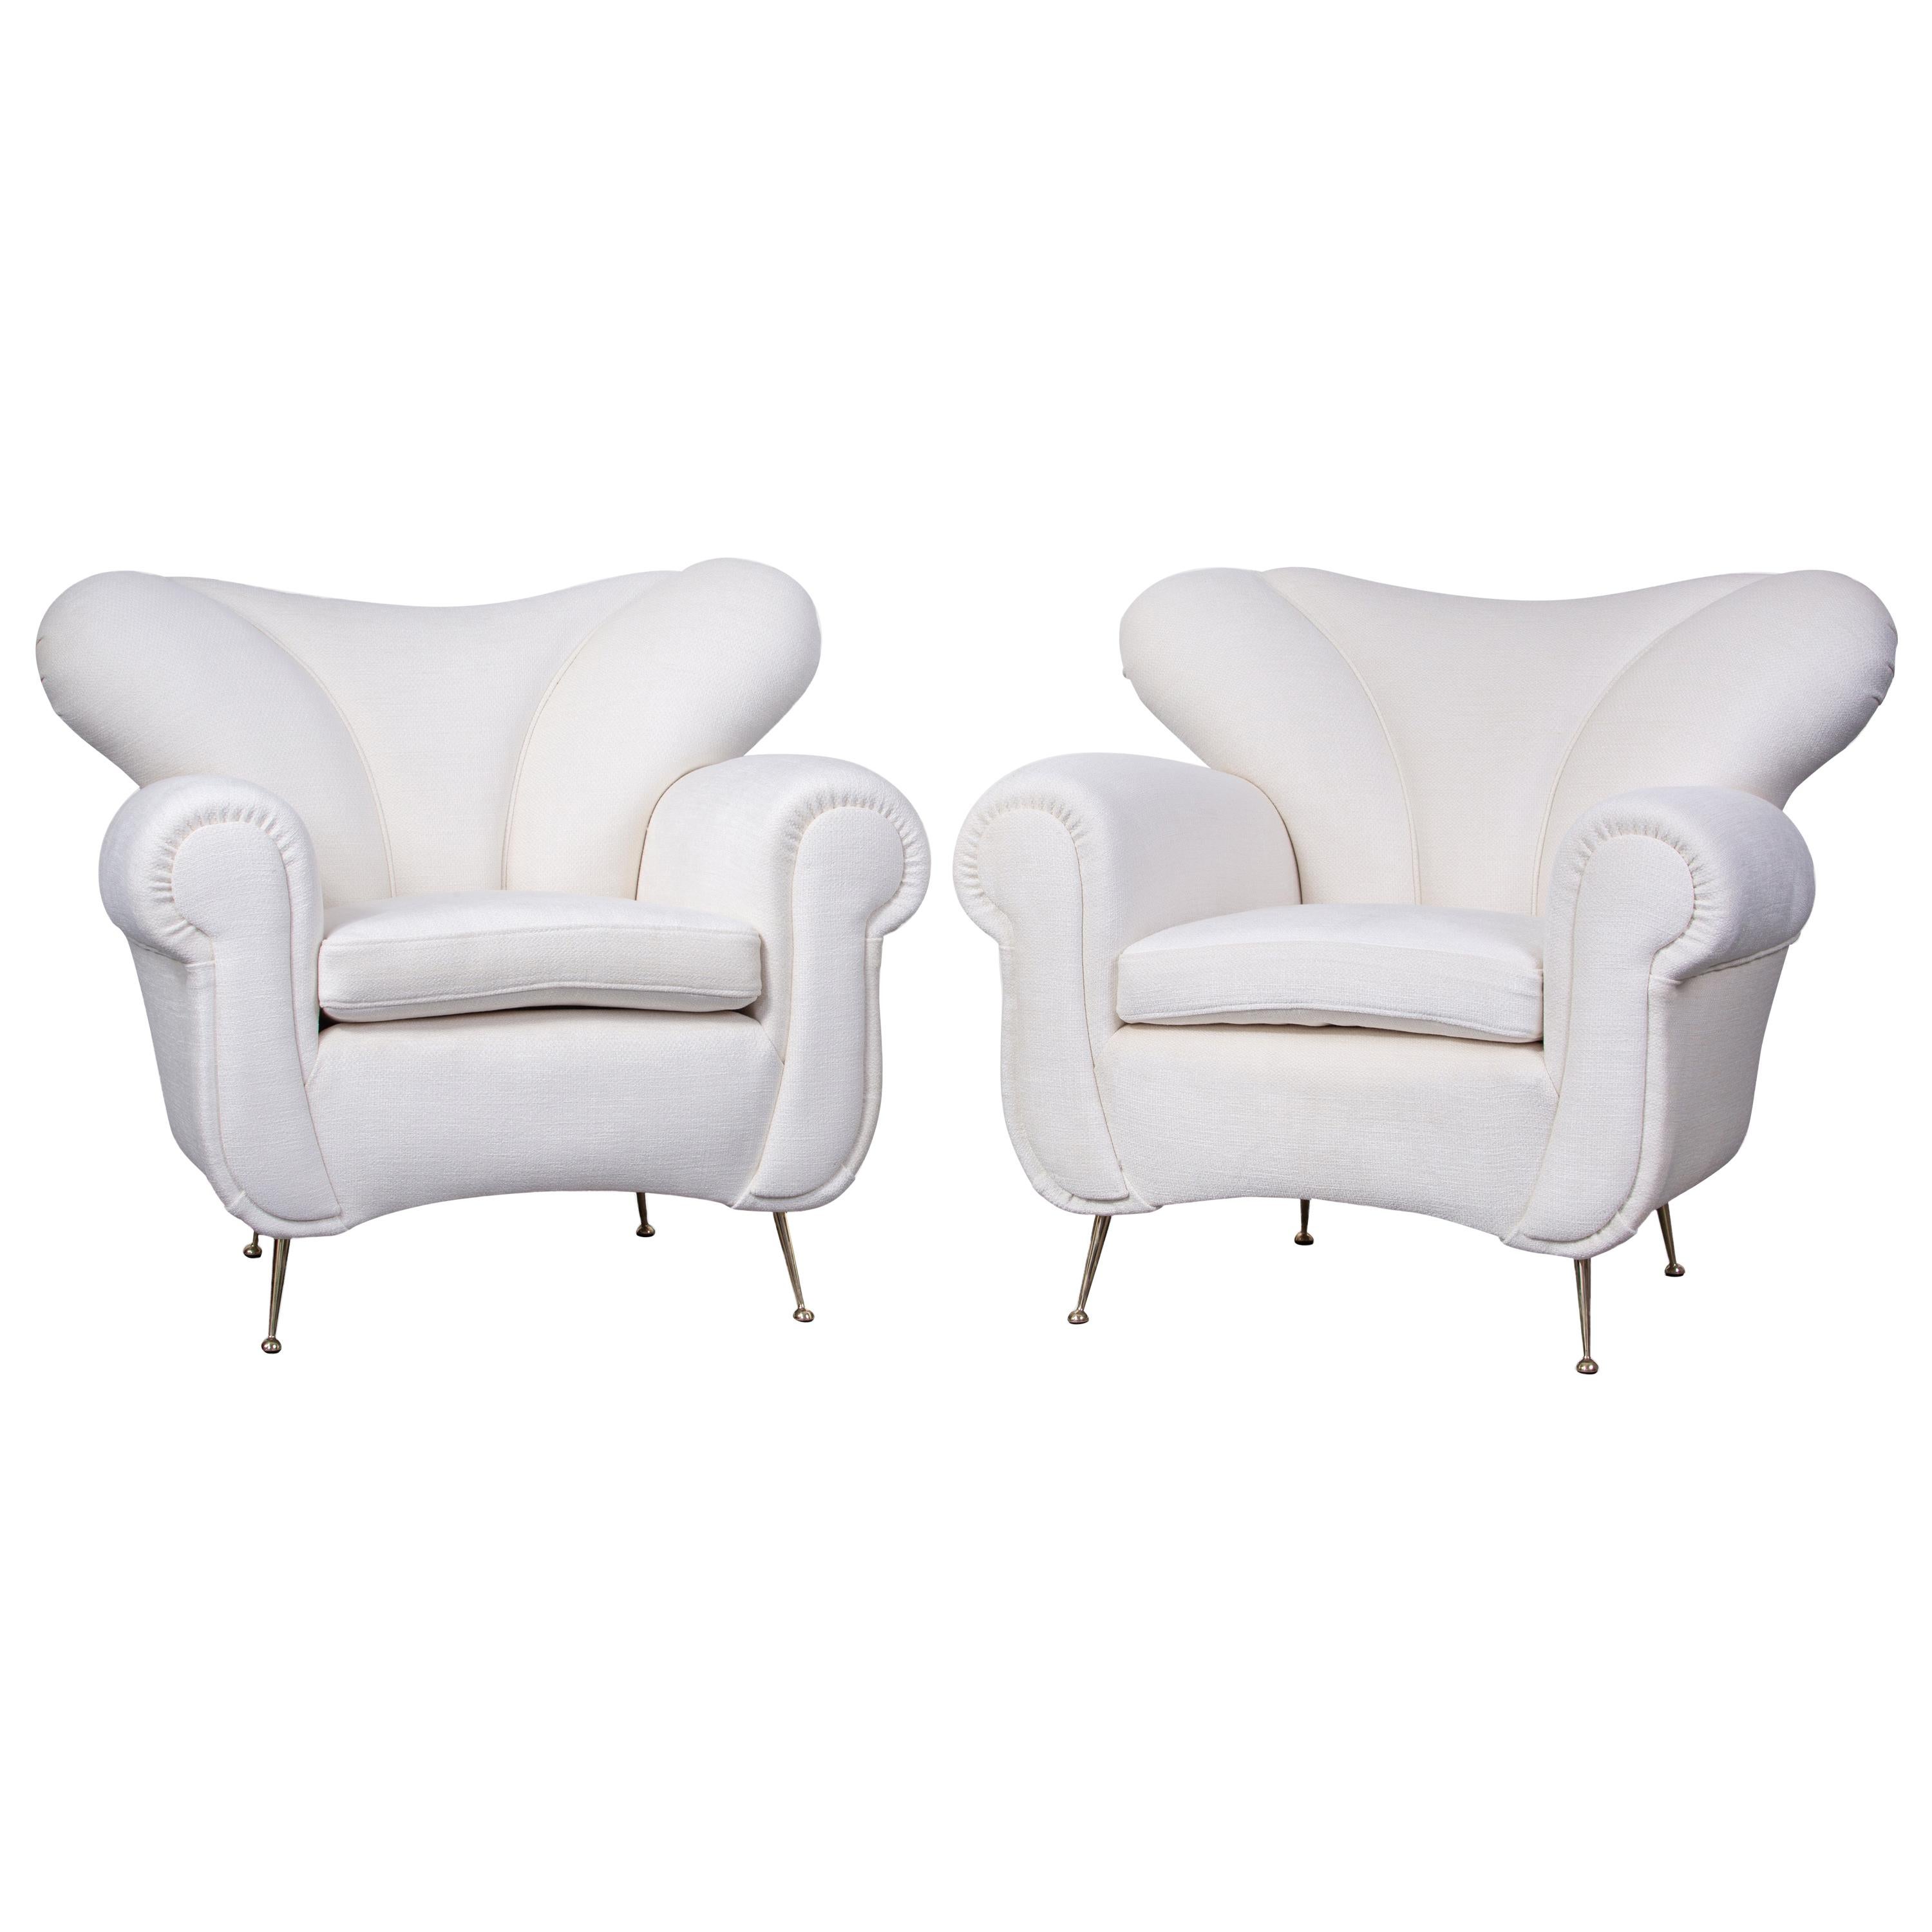 Pair of Mid-Century Armchairs, Italy 1950s, Reupholstered in Pierre Frey Velvet